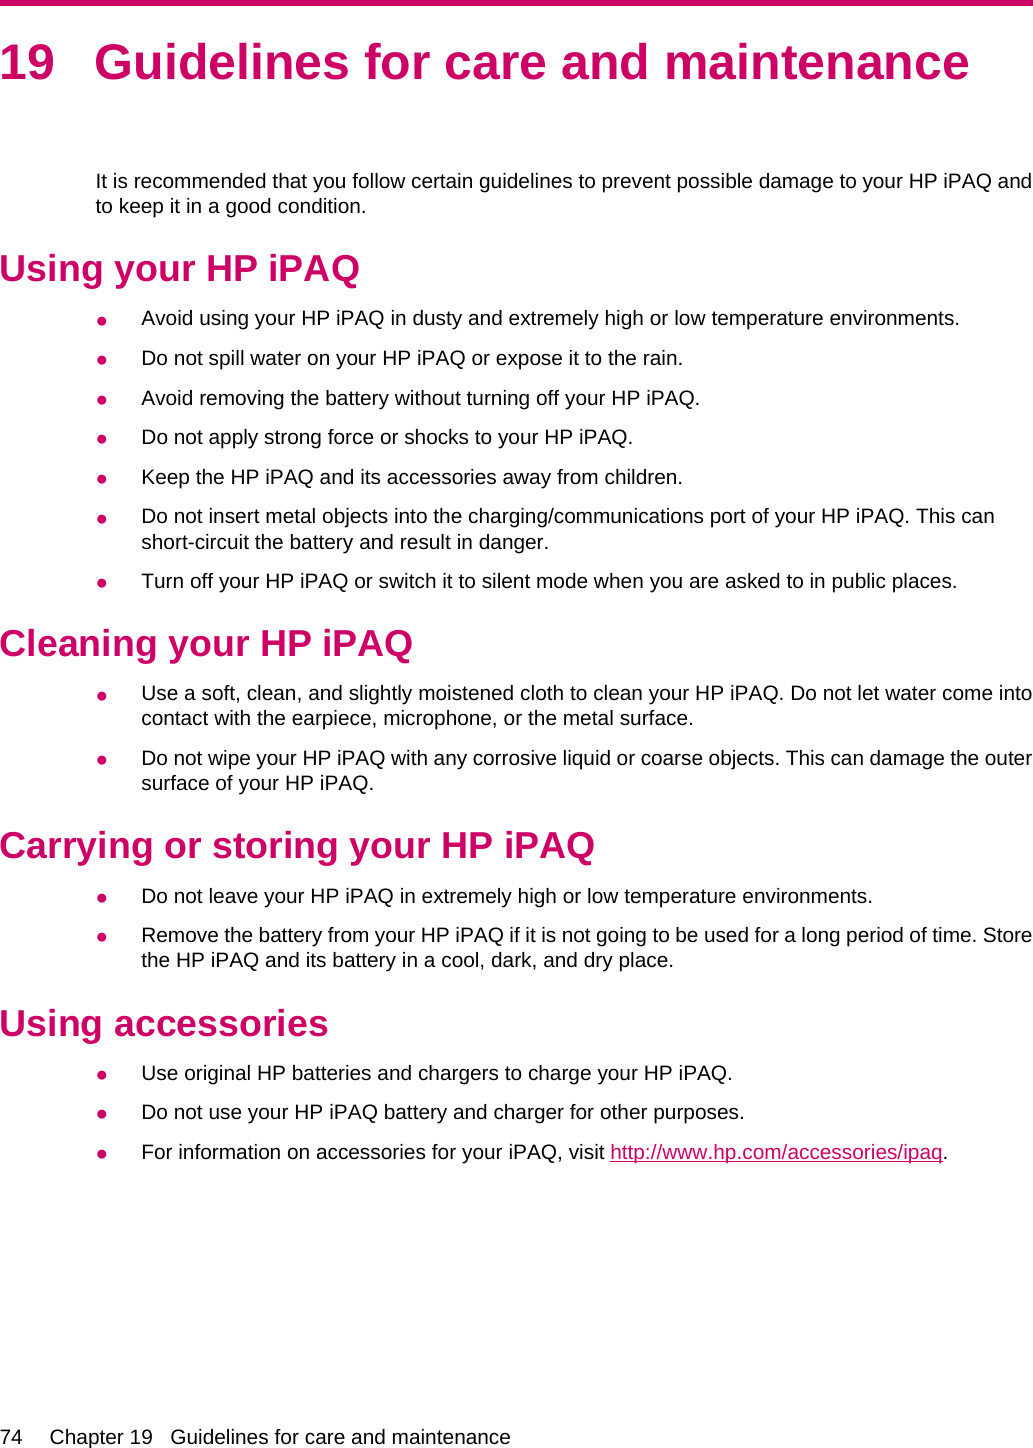 19 Guidelines for care and maintenanceIt is recommended that you follow certain guidelines to prevent possible damage to your HP iPAQ andto keep it in a good condition.Using your HP iPAQ●Avoid using your HP iPAQ in dusty and extremely high or low temperature environments.●Do not spill water on your HP iPAQ or expose it to the rain.●Avoid removing the battery without turning off your HP iPAQ.●Do not apply strong force or shocks to your HP iPAQ.●Keep the HP iPAQ and its accessories away from children.●Do not insert metal objects into the charging/communications port of your HP iPAQ. This canshort-circuit the battery and result in danger.●Turn off your HP iPAQ or switch it to silent mode when you are asked to in public places.Cleaning your HP iPAQ●Use a soft, clean, and slightly moistened cloth to clean your HP iPAQ. Do not let water come intocontact with the earpiece, microphone, or the metal surface.●Do not wipe your HP iPAQ with any corrosive liquid or coarse objects. This can damage the outersurface of your HP iPAQ.Carrying or storing your HP iPAQ●Do not leave your HP iPAQ in extremely high or low temperature environments.●Remove the battery from your HP iPAQ if it is not going to be used for a long period of time. Storethe HP iPAQ and its battery in a cool, dark, and dry place.Using accessories●Use original HP batteries and chargers to charge your HP iPAQ.●Do not use your HP iPAQ battery and charger for other purposes.●For information on accessories for your iPAQ, visit http://www.hp.com/accessories/ipaq.74 Chapter 19   Guidelines for care and maintenance